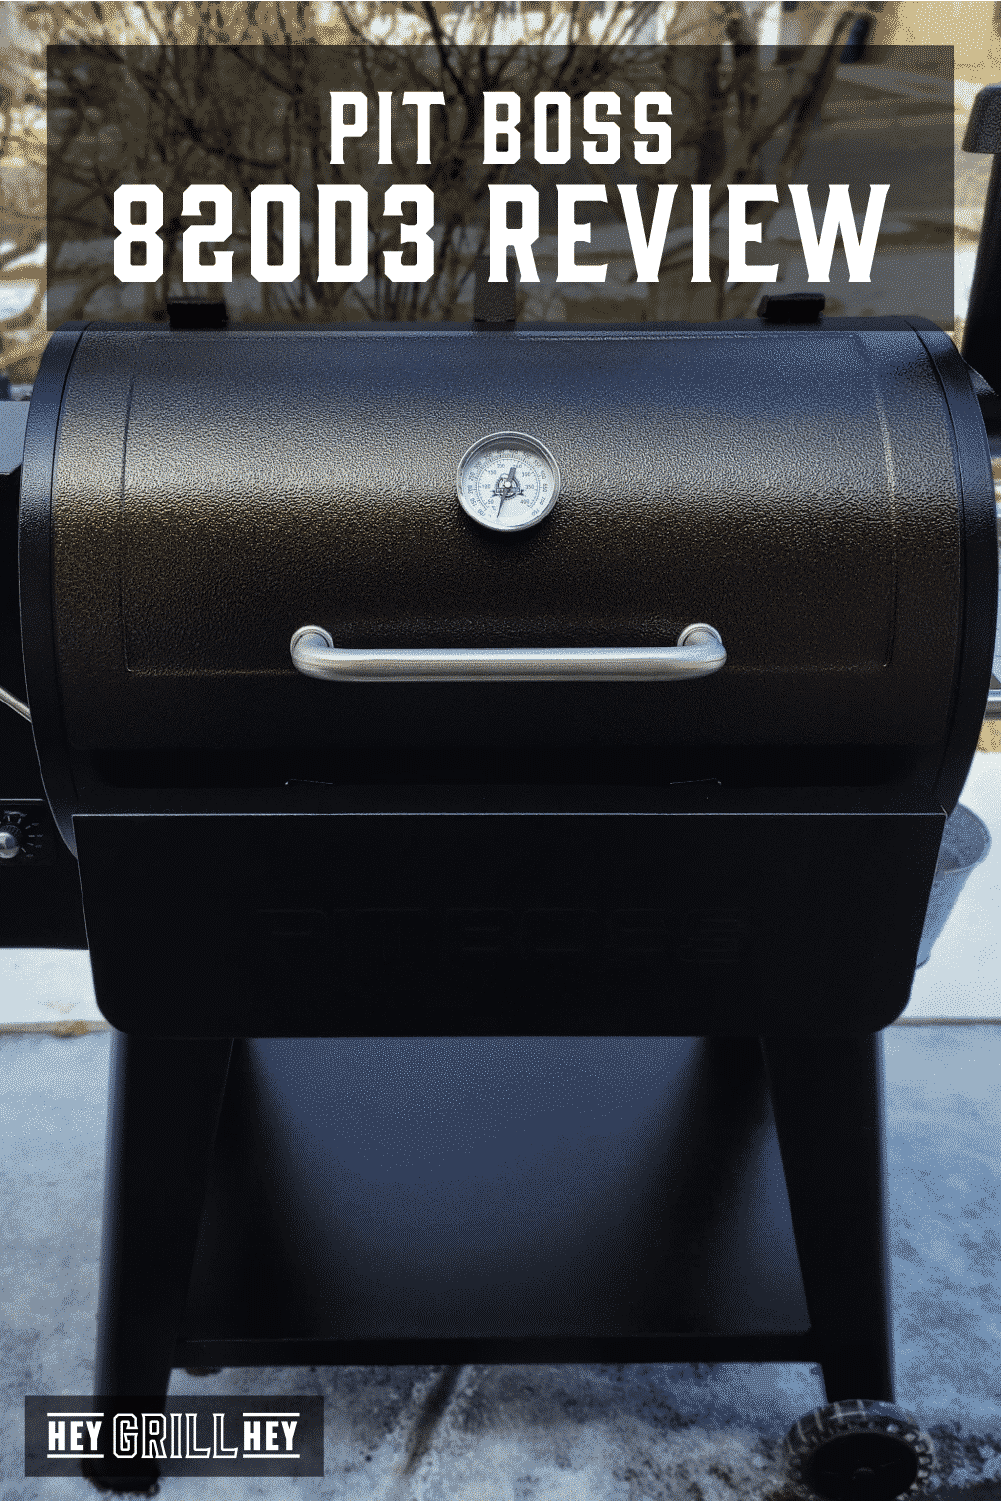 Pit Boss 820D3 Review - Hey Grill, Hey